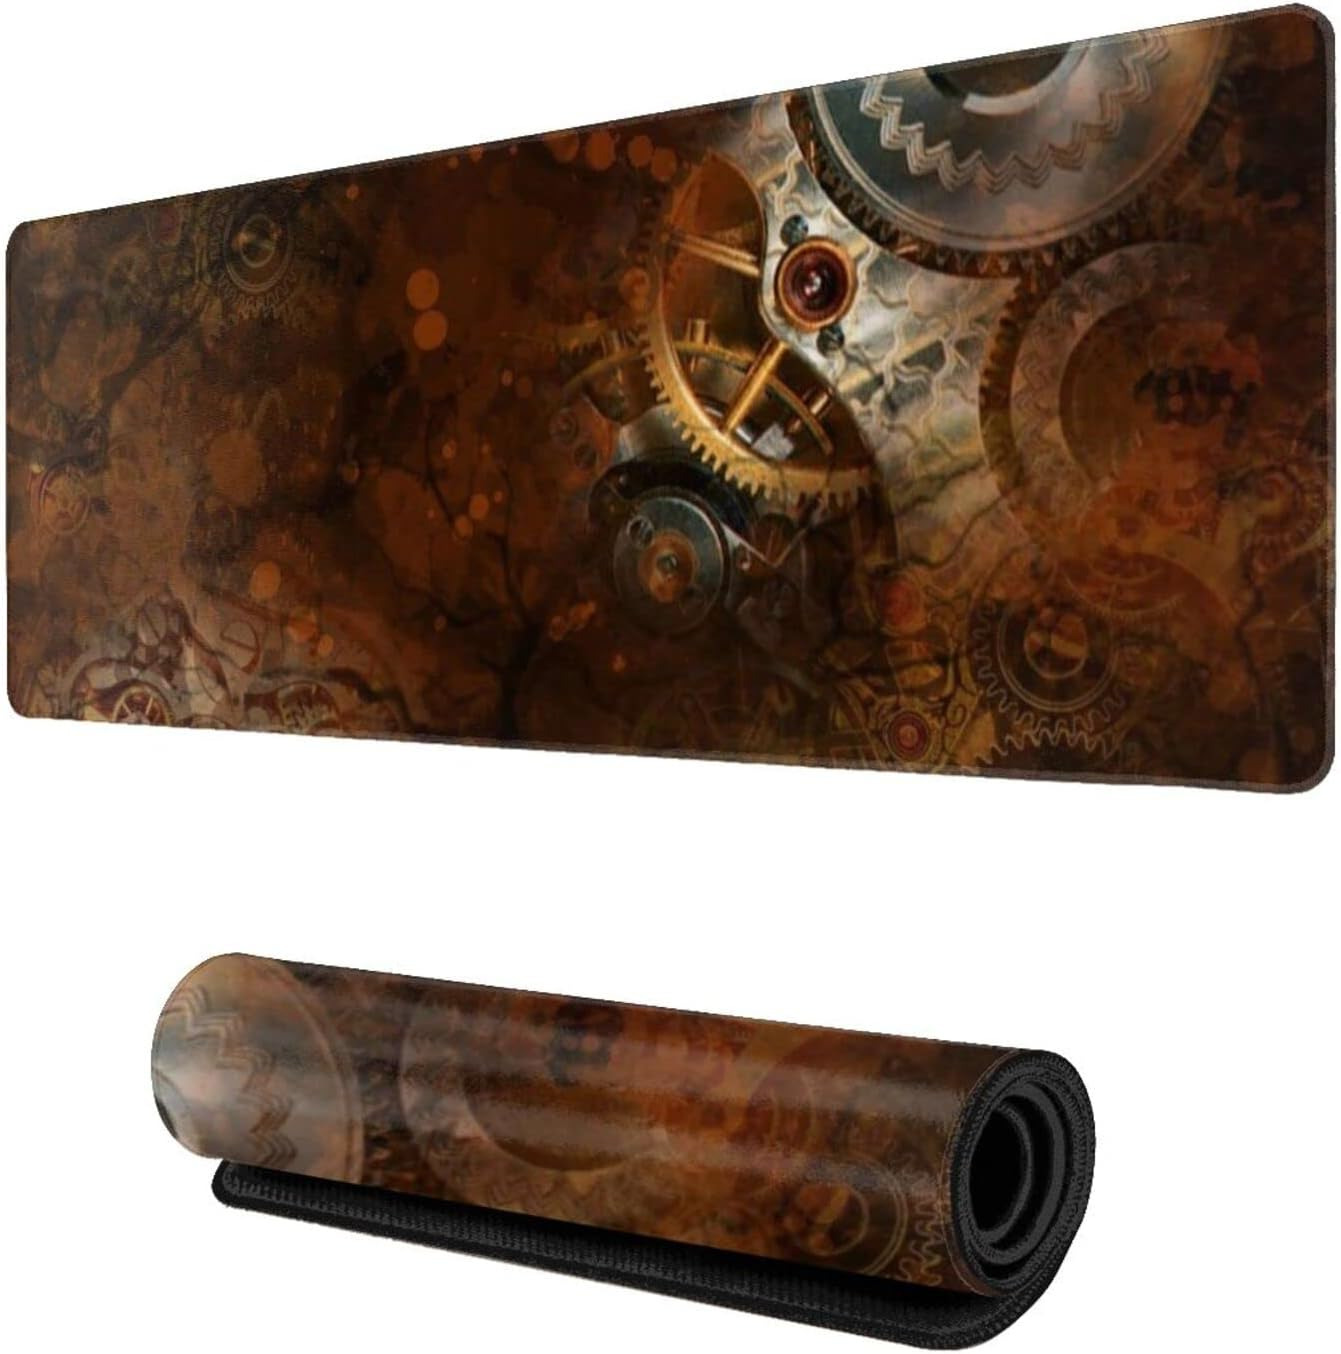 Steampunk Vintage Gear XXL XL Large Gaming Mouse Pad for Desk, Non-Slip Long Ext